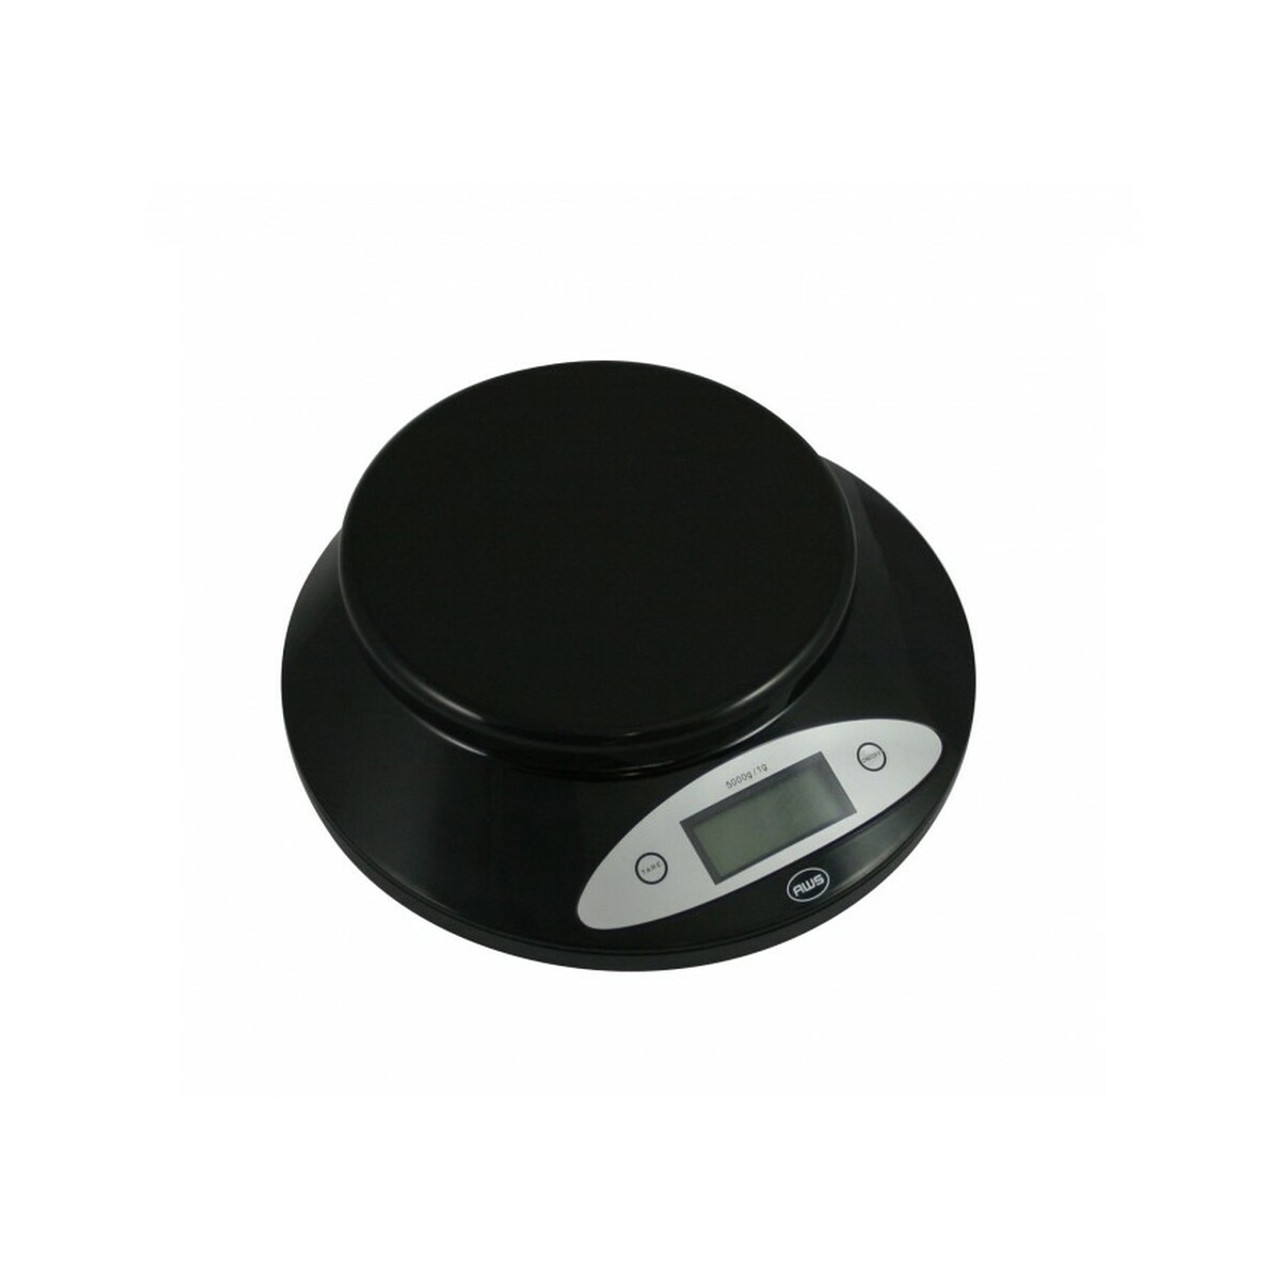 SAFFRON-5K-SS DIGITAL SCALE WITH STAINLESS STEEL BOWL, 5KG X 1G - American  Weigh Scales